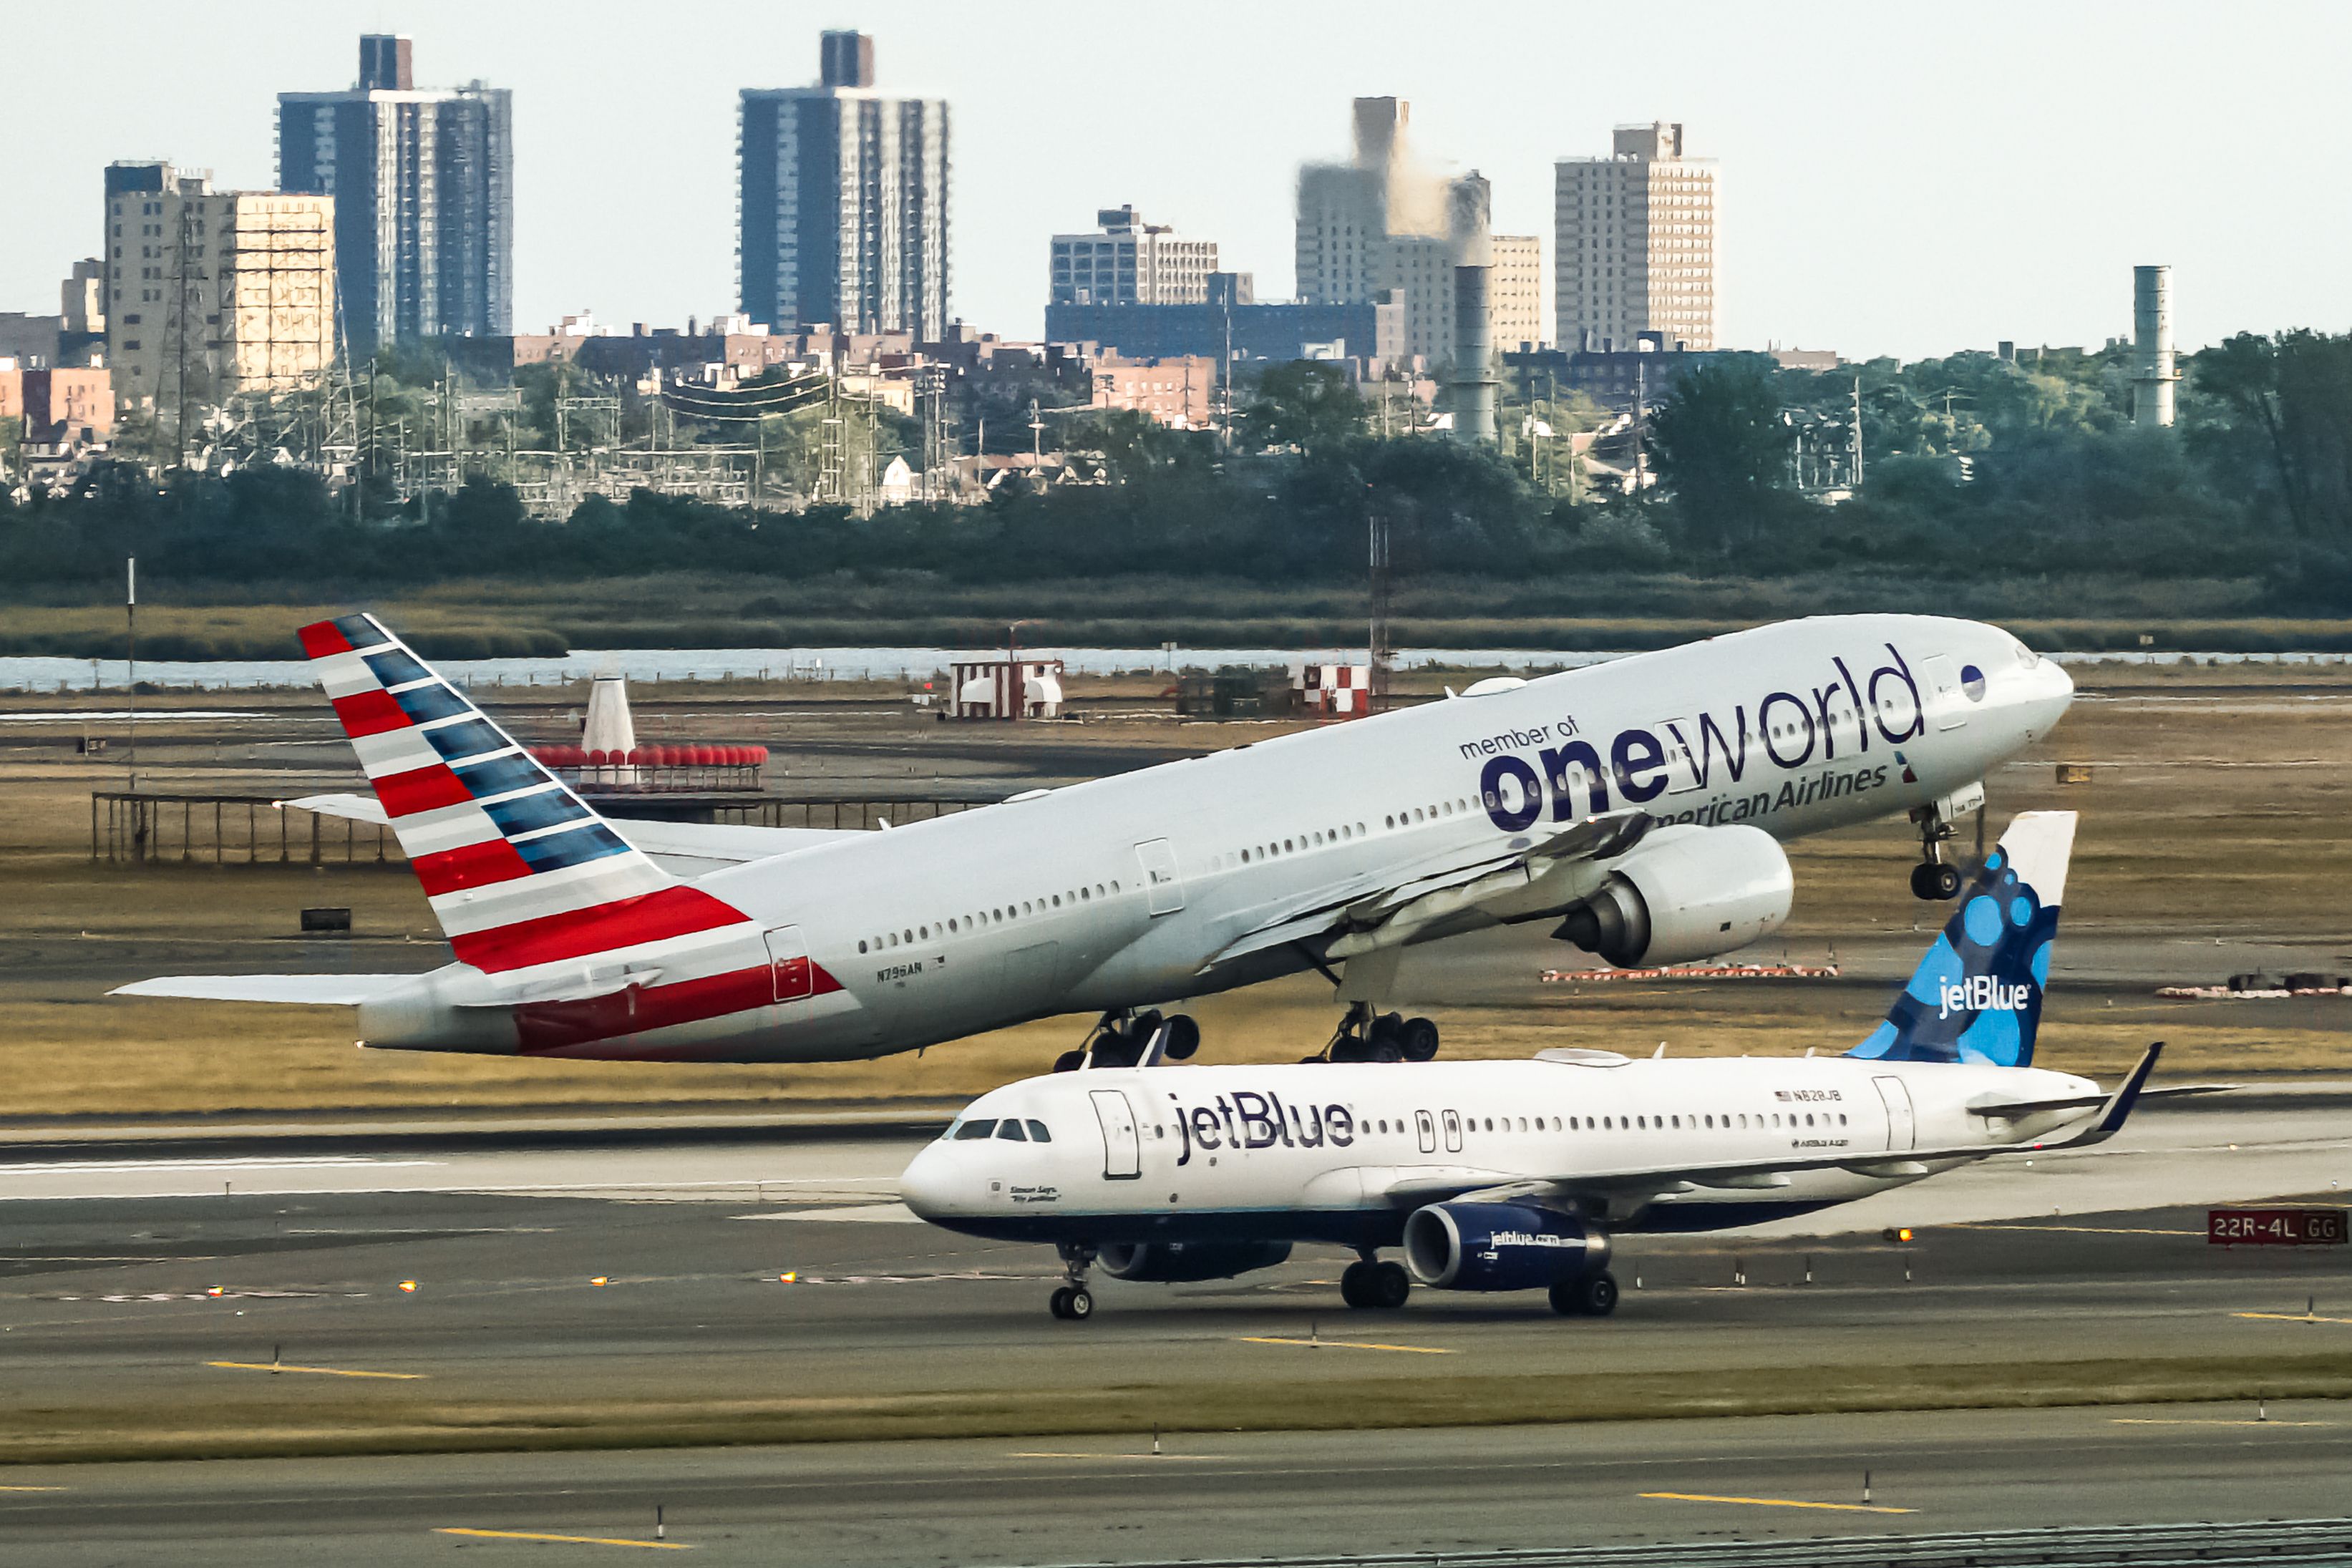 An American Airlines Boeing 777 in oneworld livery takes off while a JetBlue Airbus A320 taxis to the runway at JFK airport.